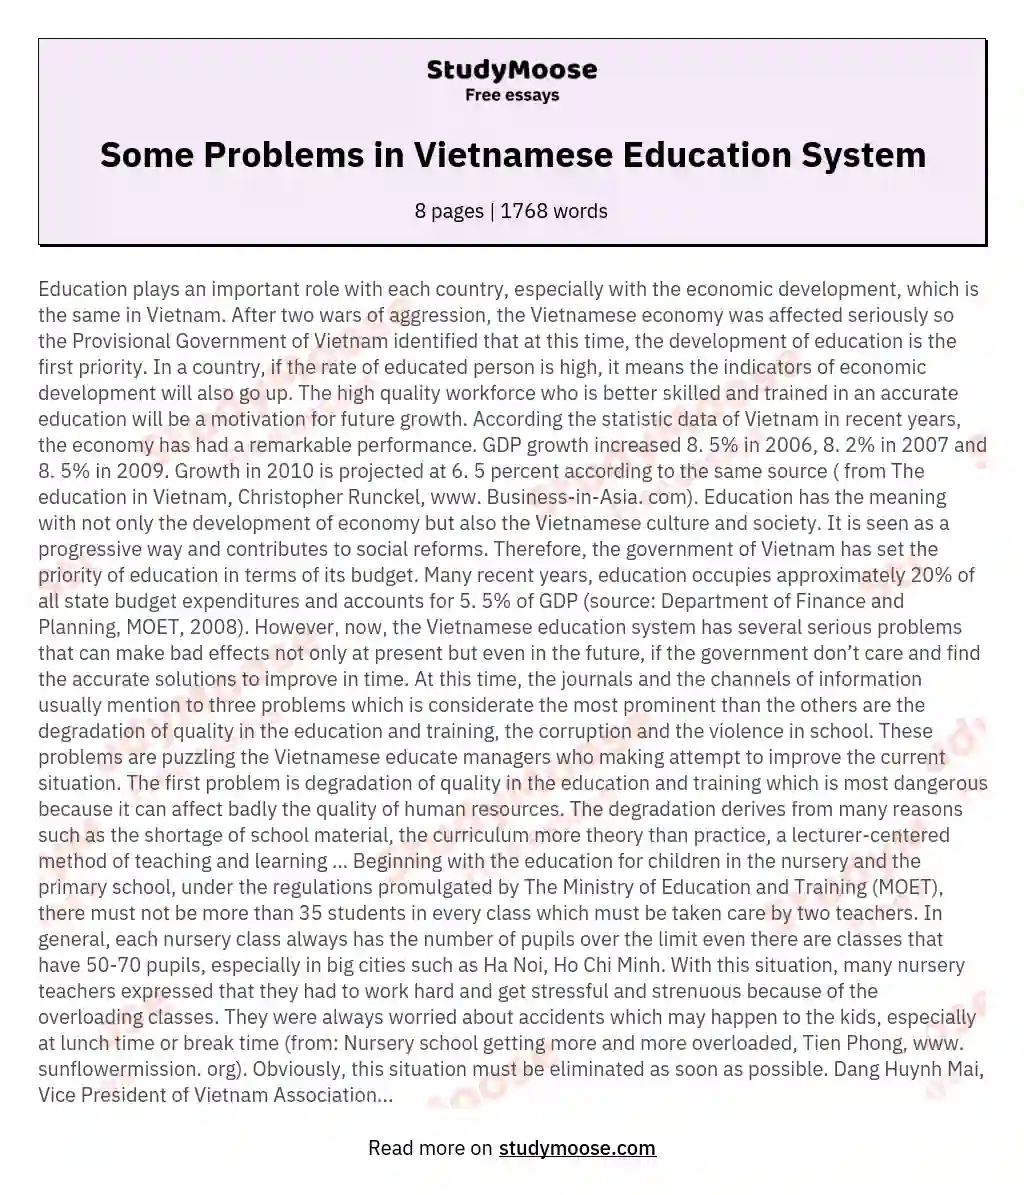 Some Problems in Vietnamese Education System essay